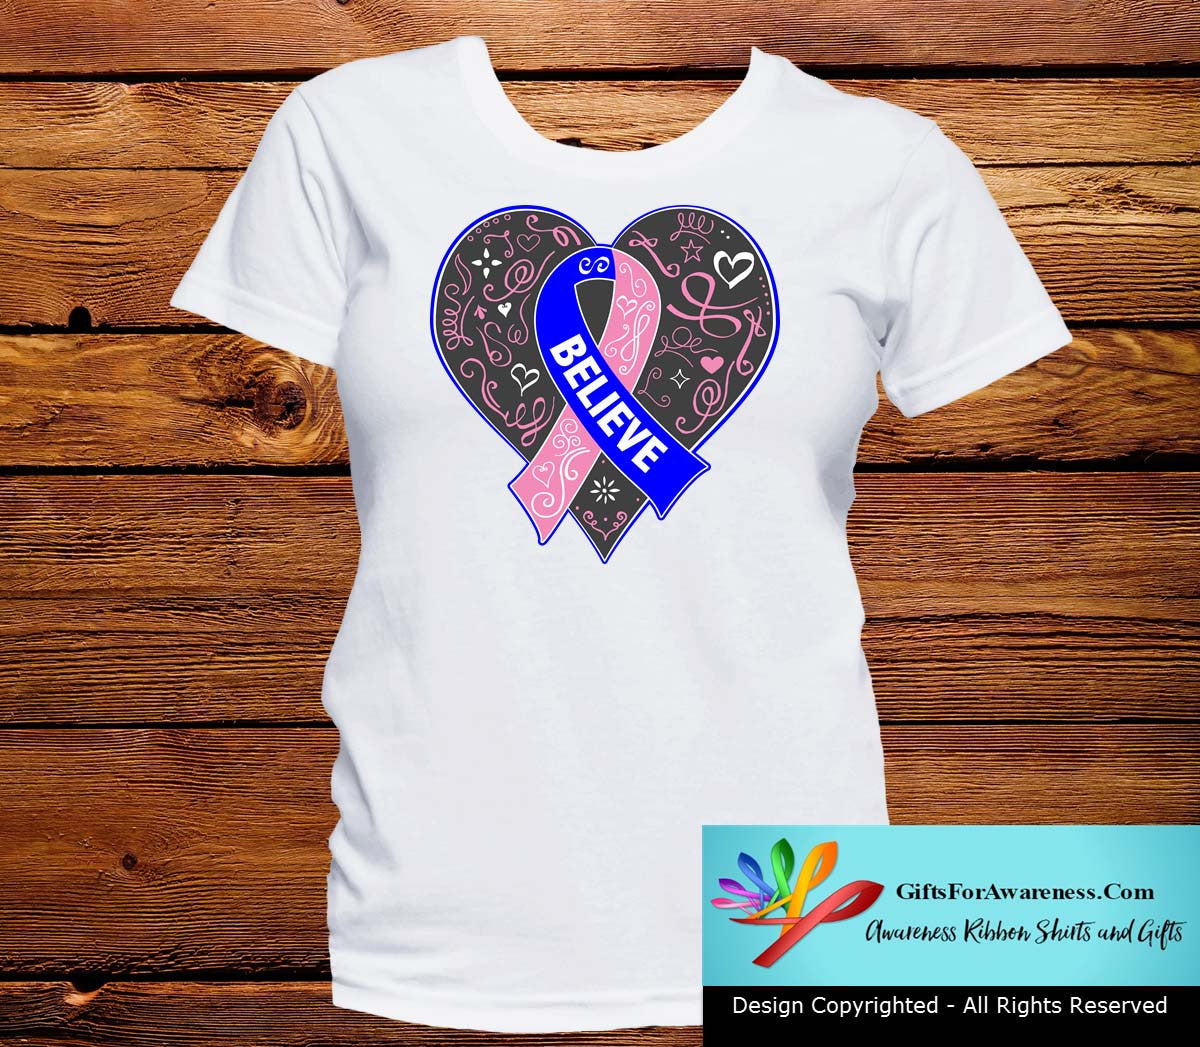 Male Breast Cancer Believe Heart Ribbon Shirts - GiftsForAwareness